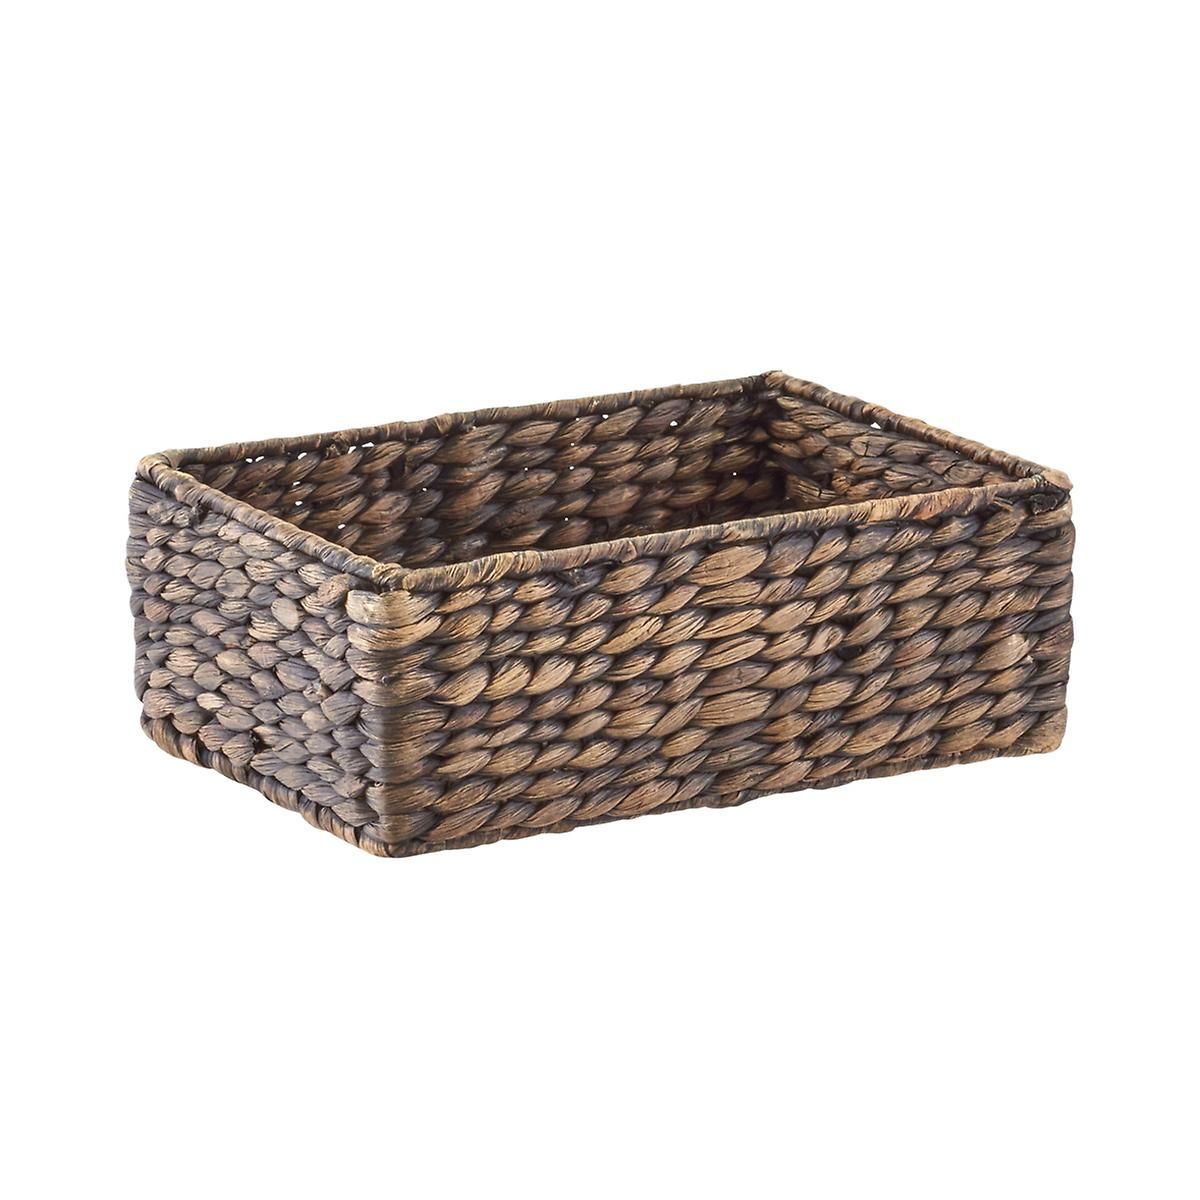 X-Small Water Hyacinth Bin Mocha | The Container Store